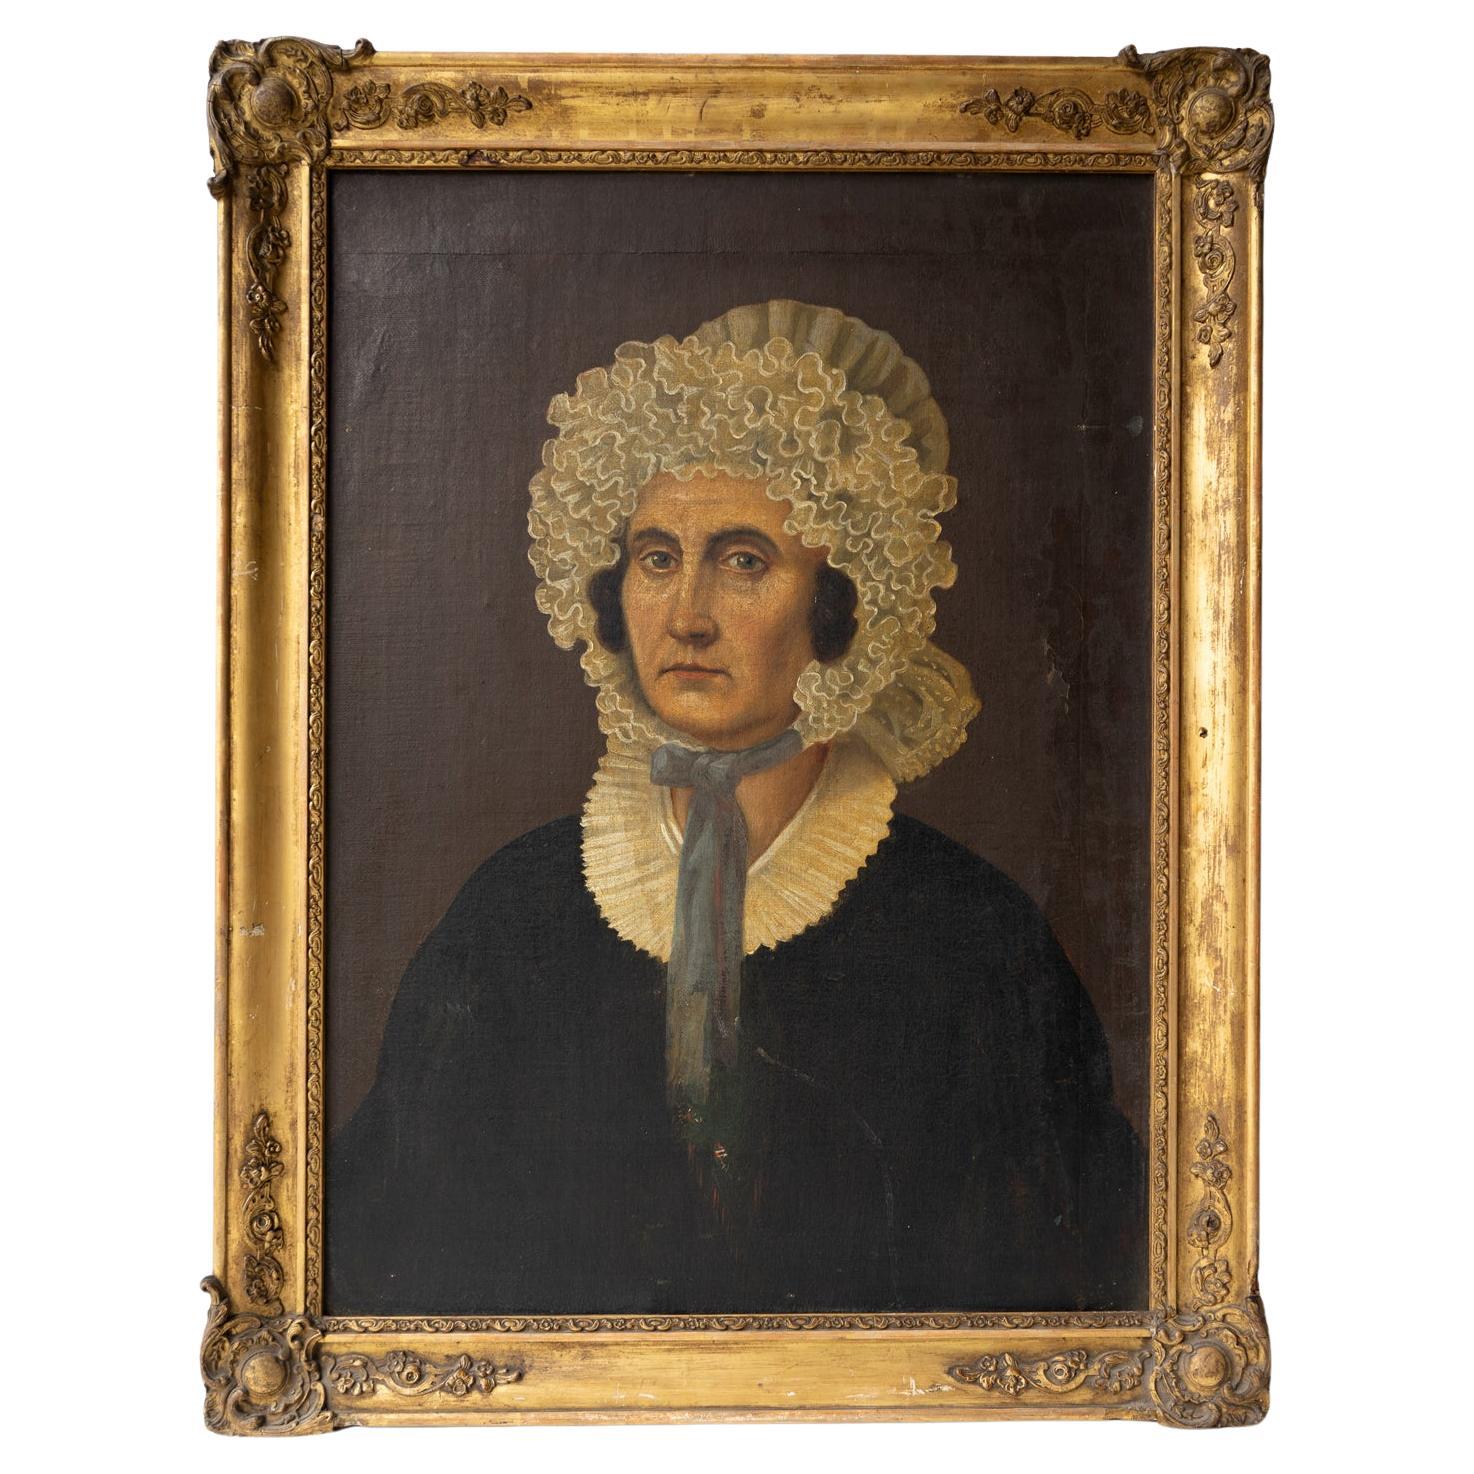  Naive Portrait Of A Woman In A Frilly Bonnet, Antique Original Oil Painting For Sale